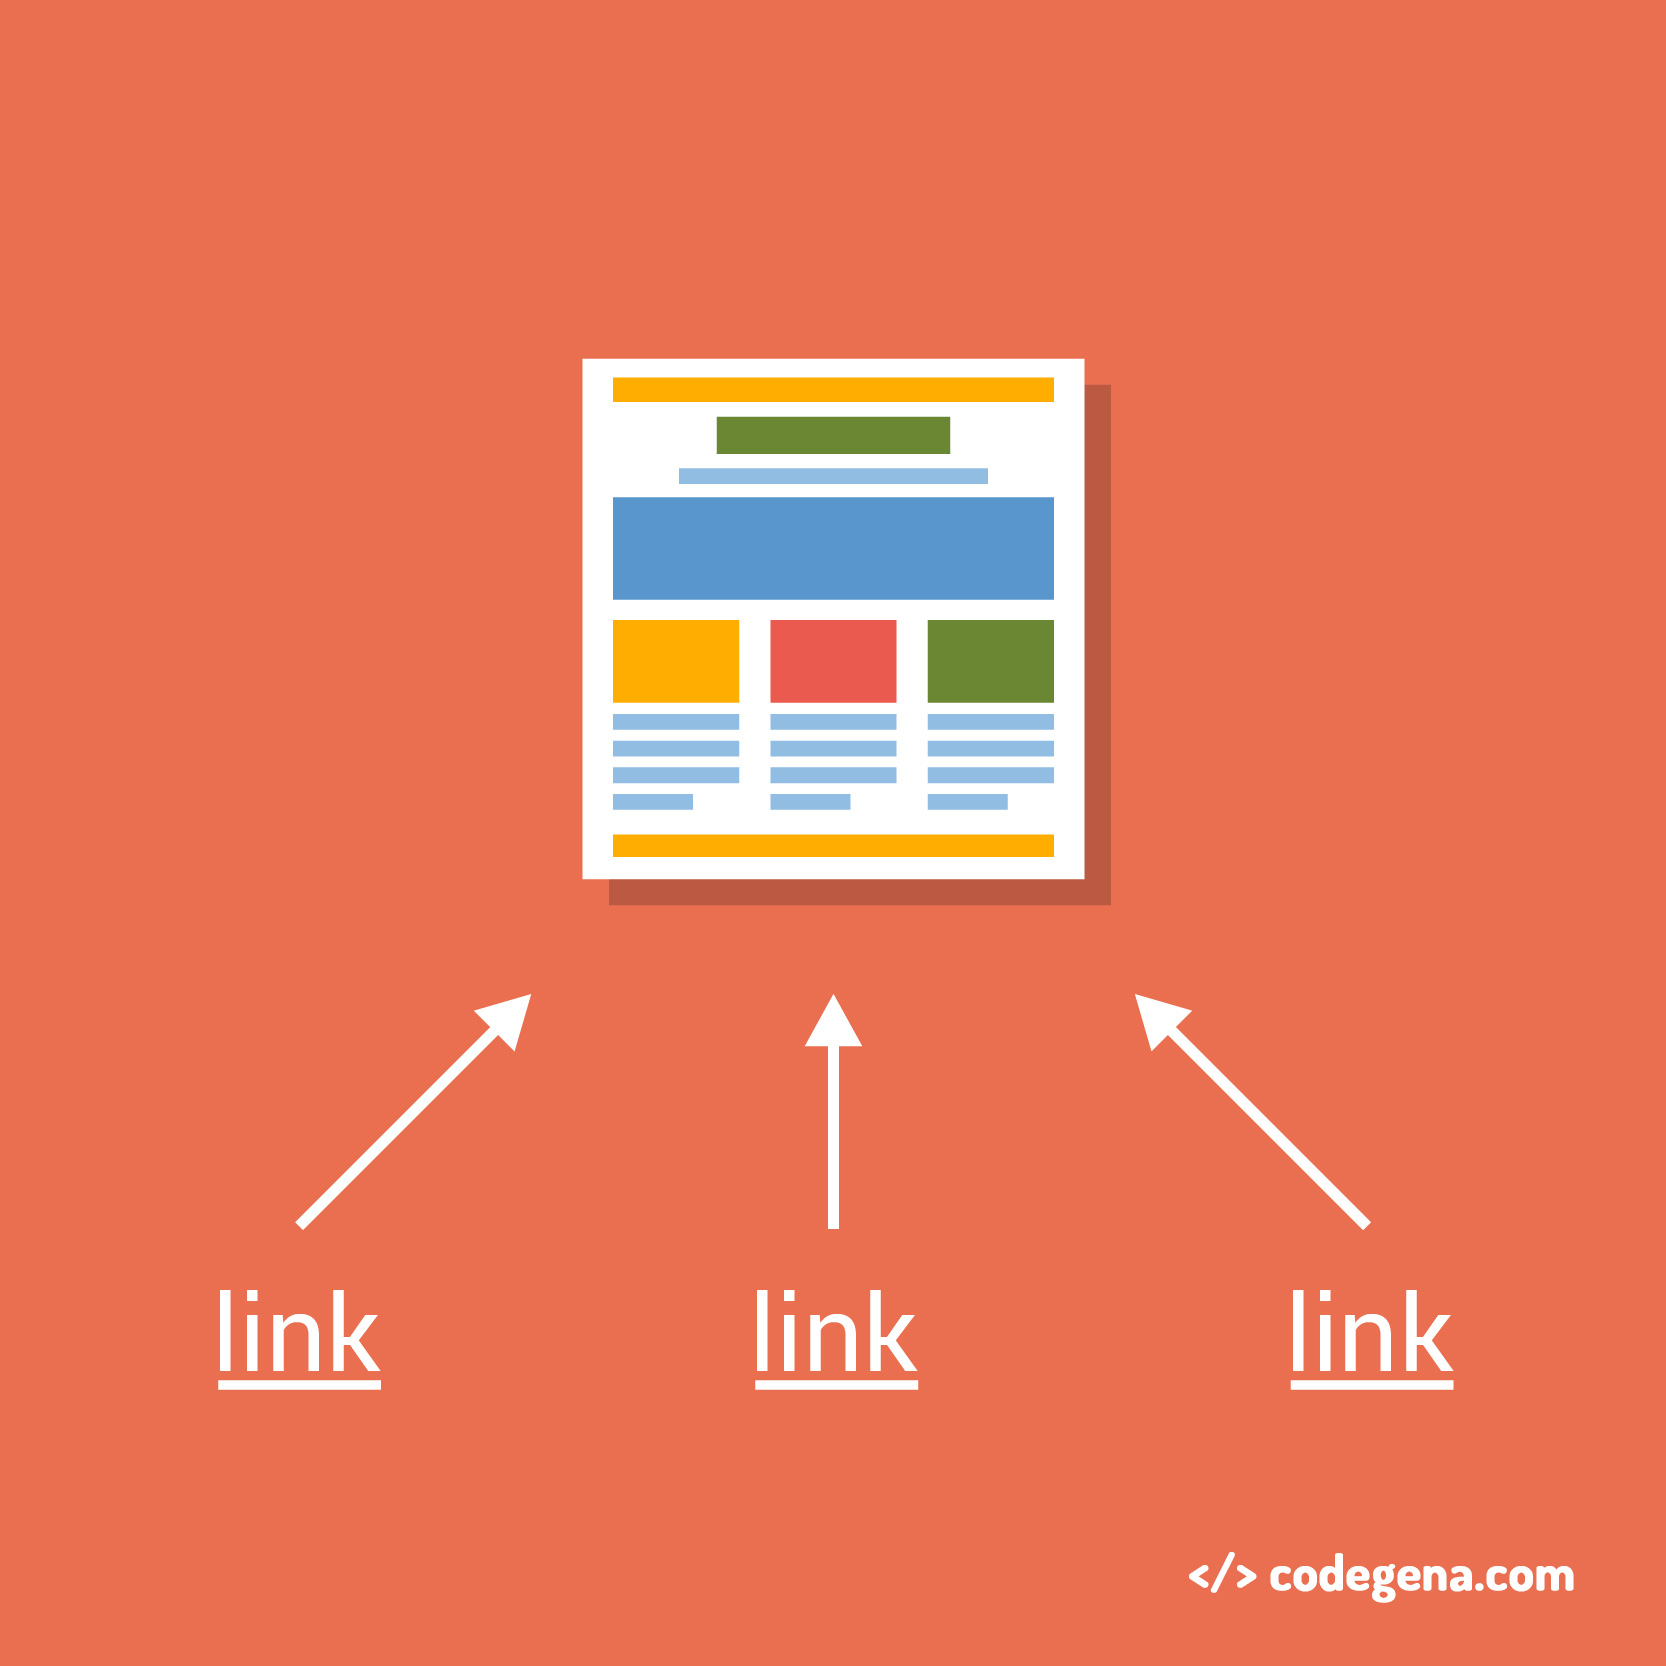 sites that offer do follow links